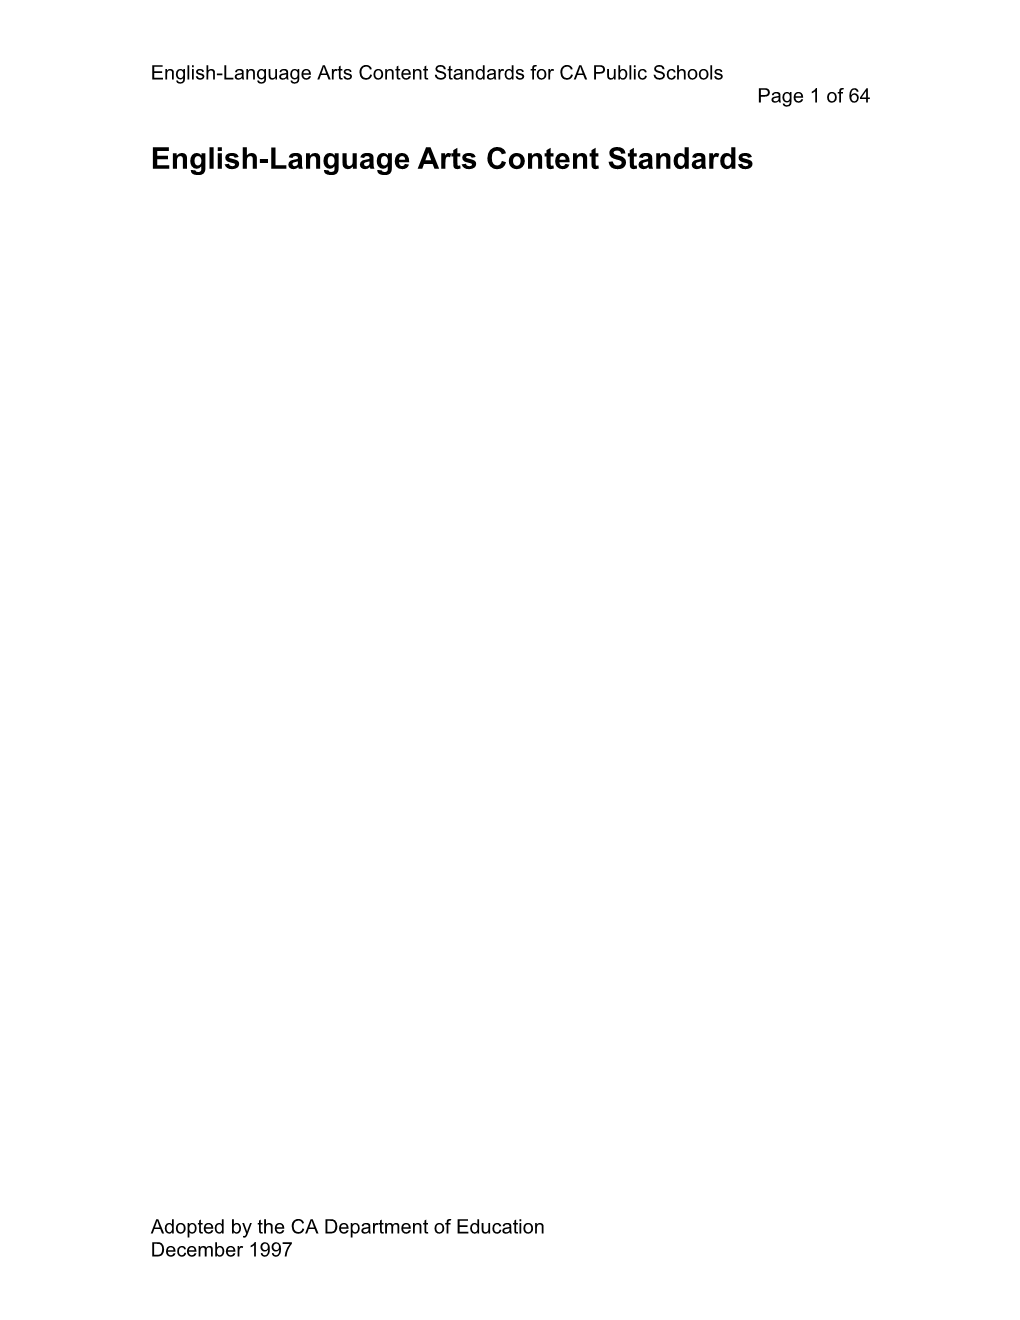 English Language Arts Content Standards - Content Standards (CA Department of Education)